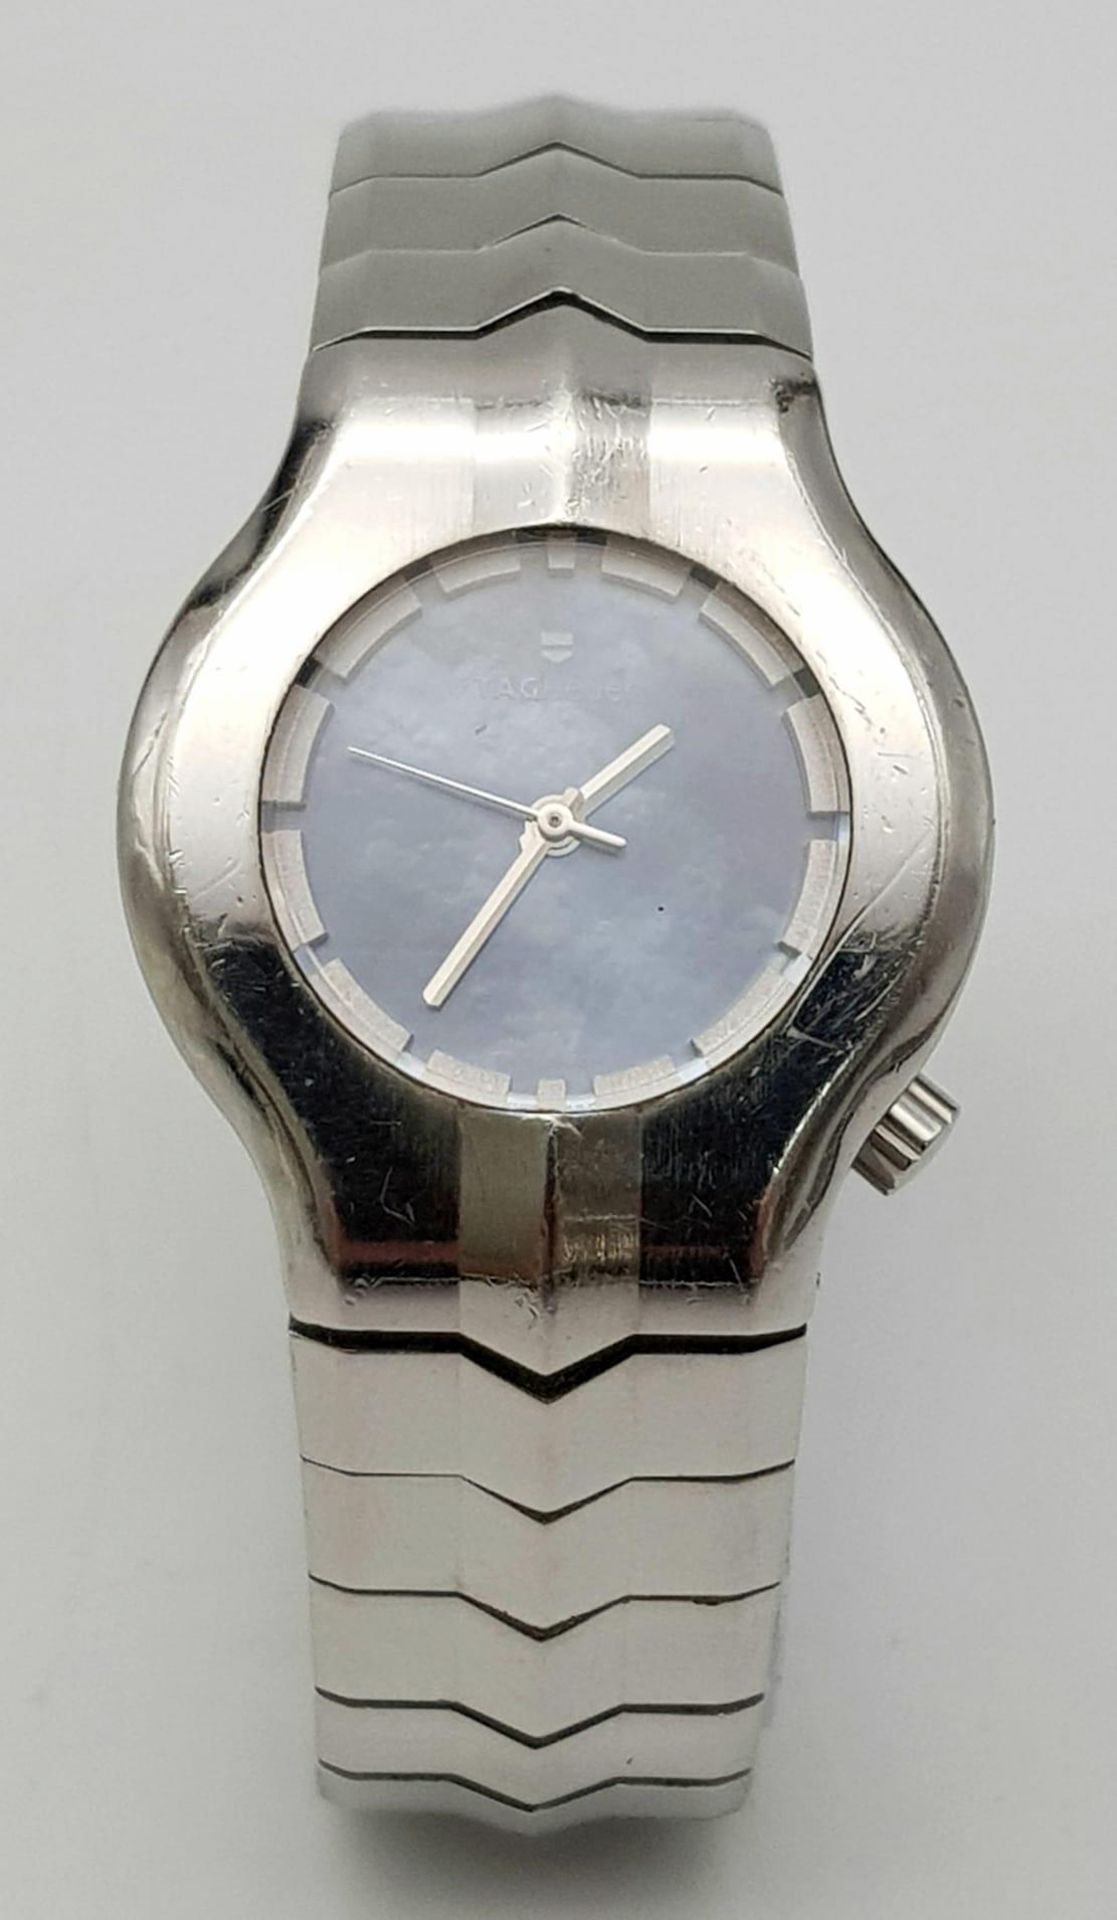 A Tag Heuer Alter Ego Quartz Ladies Watch. Stainless steel bracelet and case - 29mm. Mother of pearl - Image 2 of 7